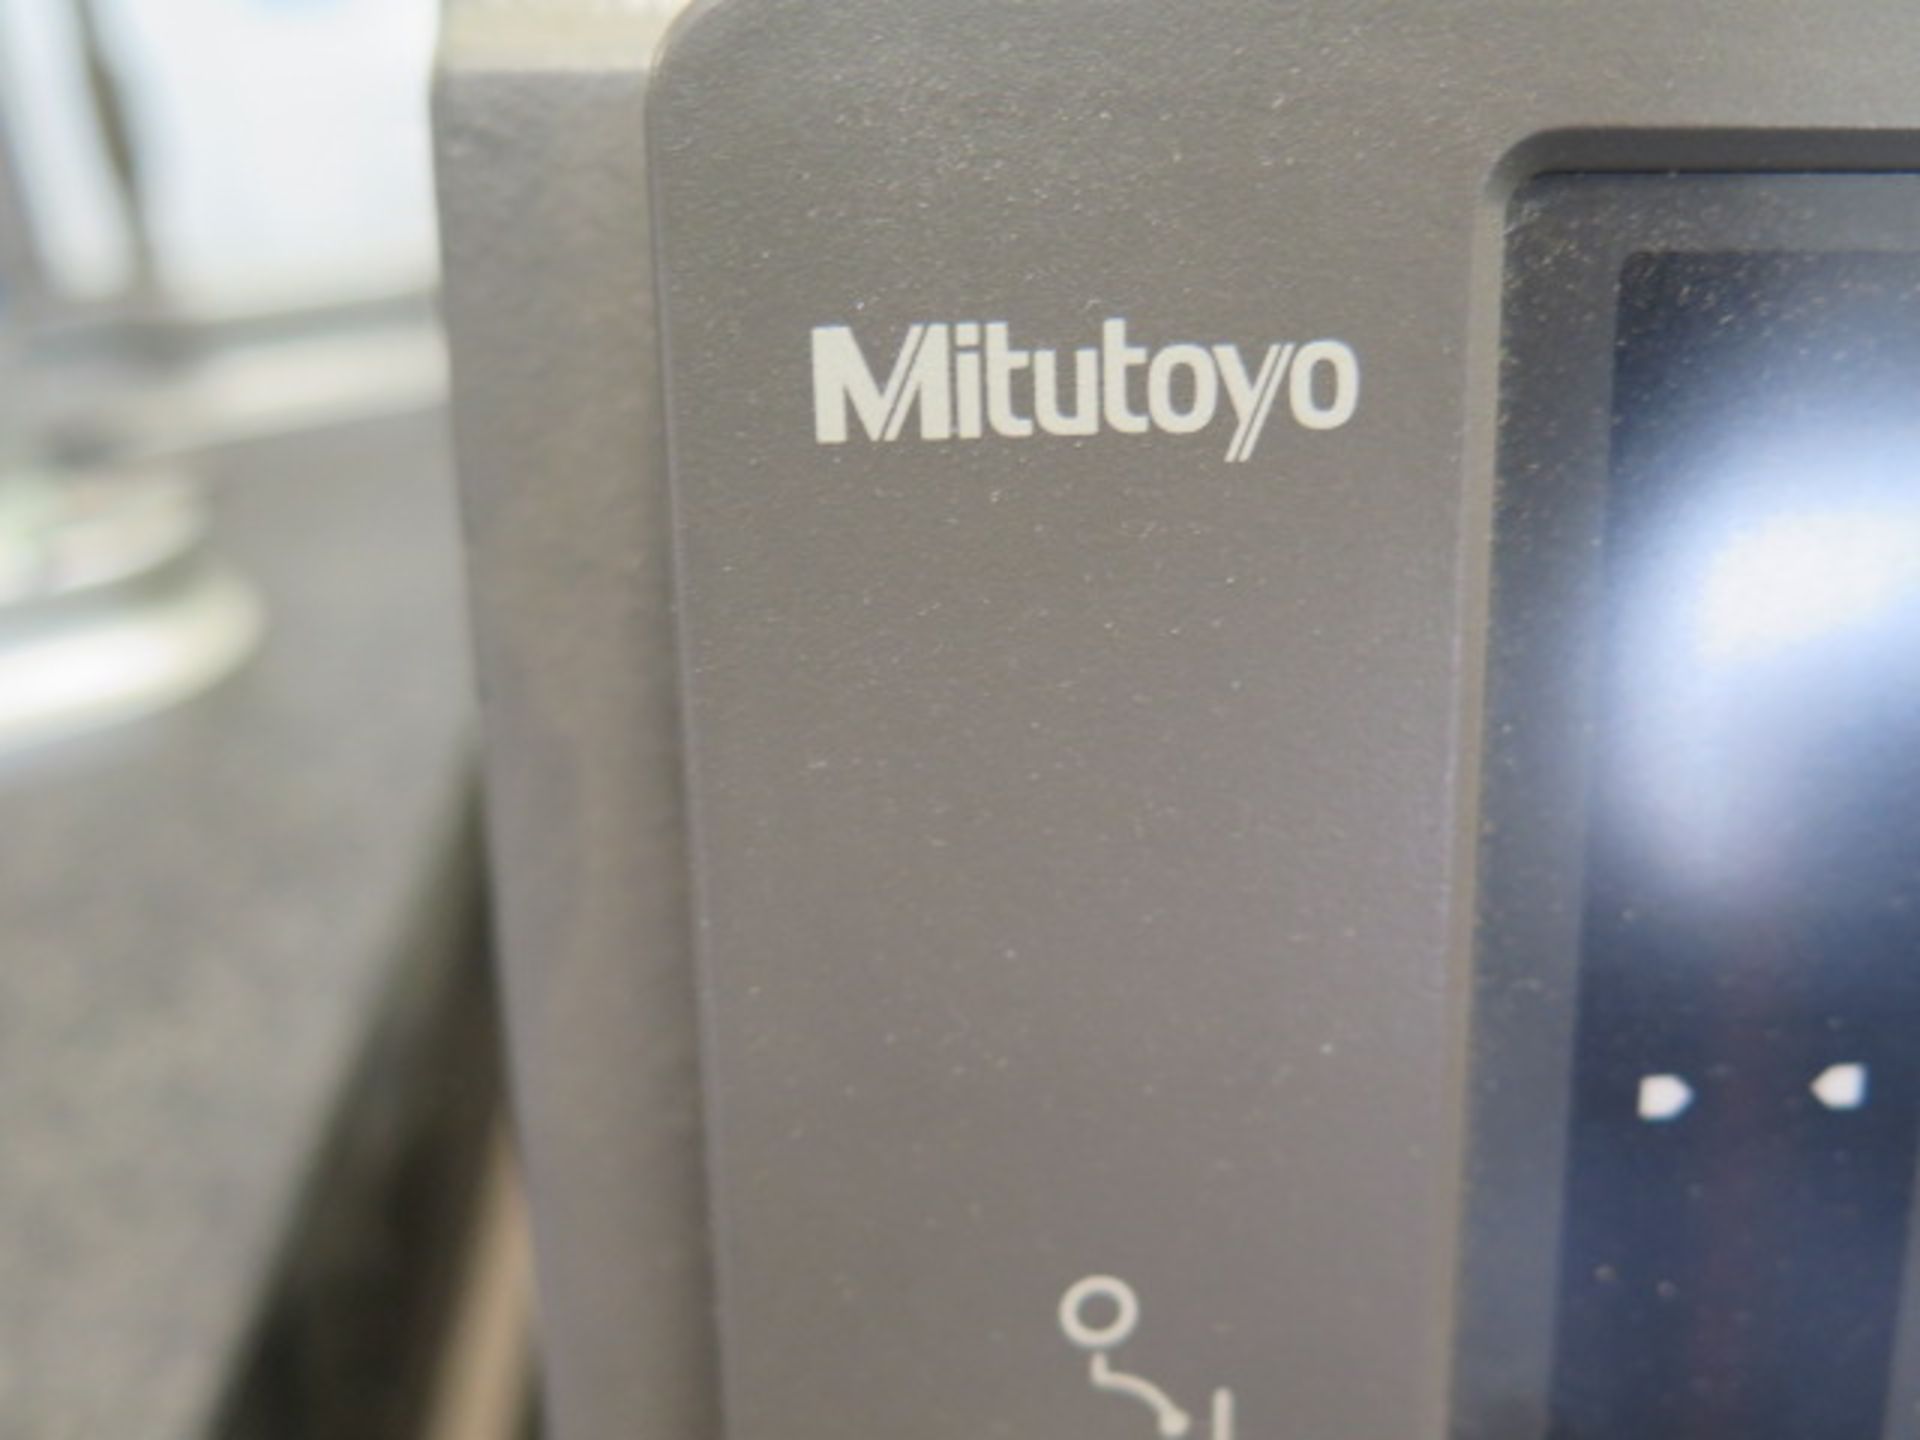 Mitutoyo LSM-9506 mdl. 544-116-1A Laser Scan Mictometer s/n 402108 (SOLD AS-IS - NO WARRANTY) - Image 4 of 13